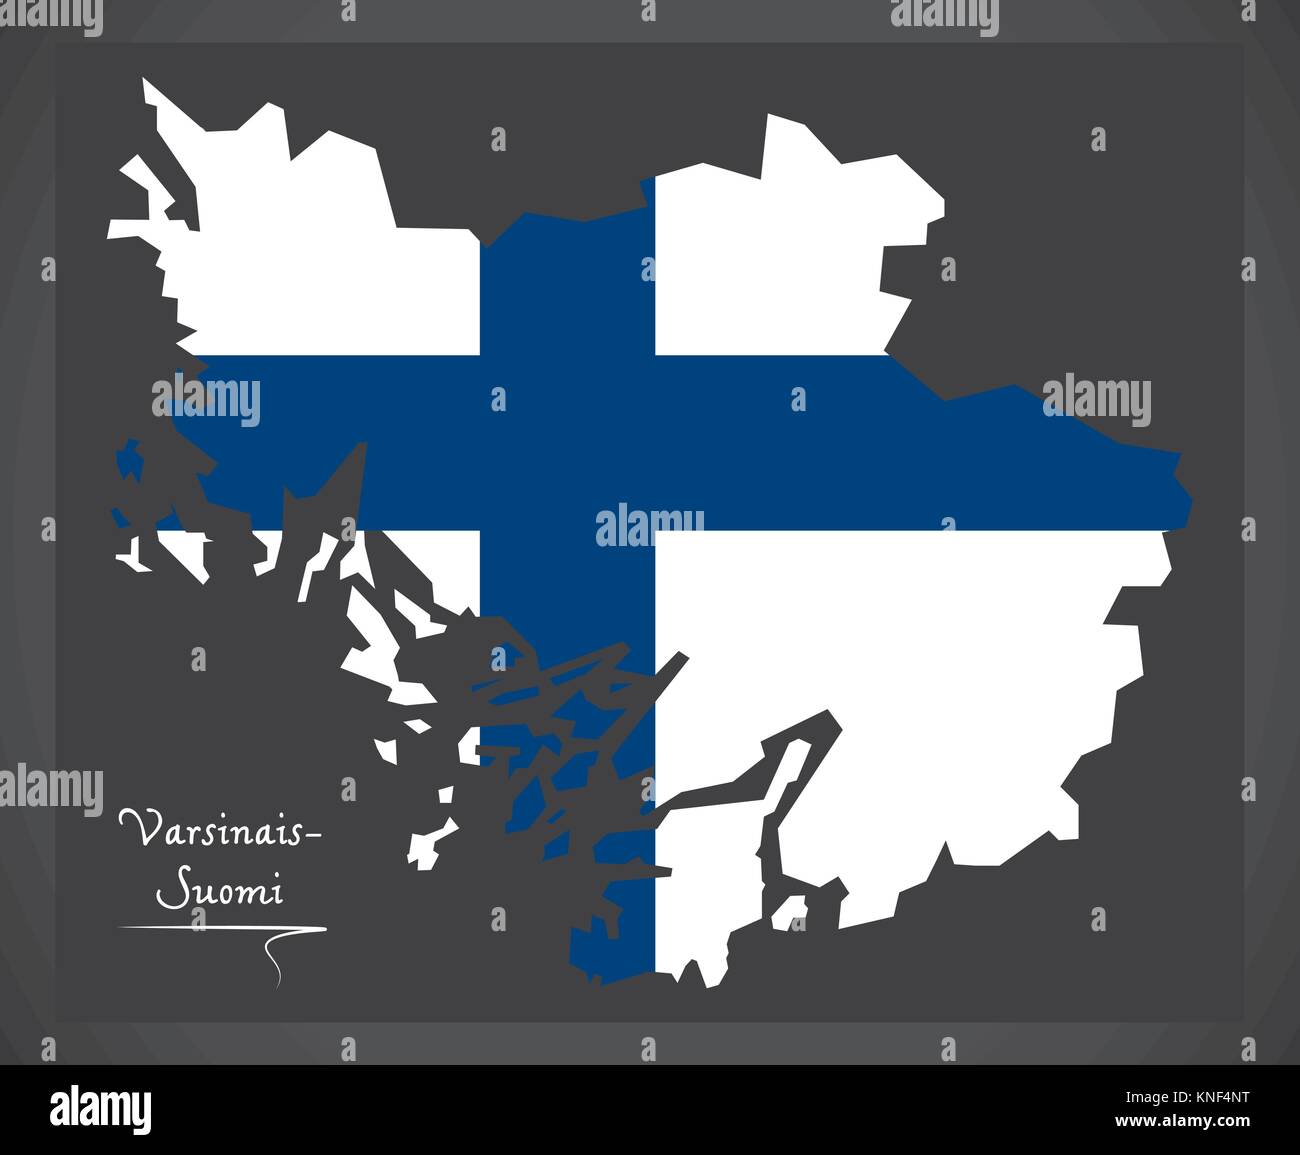 Varsinais-Suomi map of Finland with Finnish national flag illustration Stock Vector